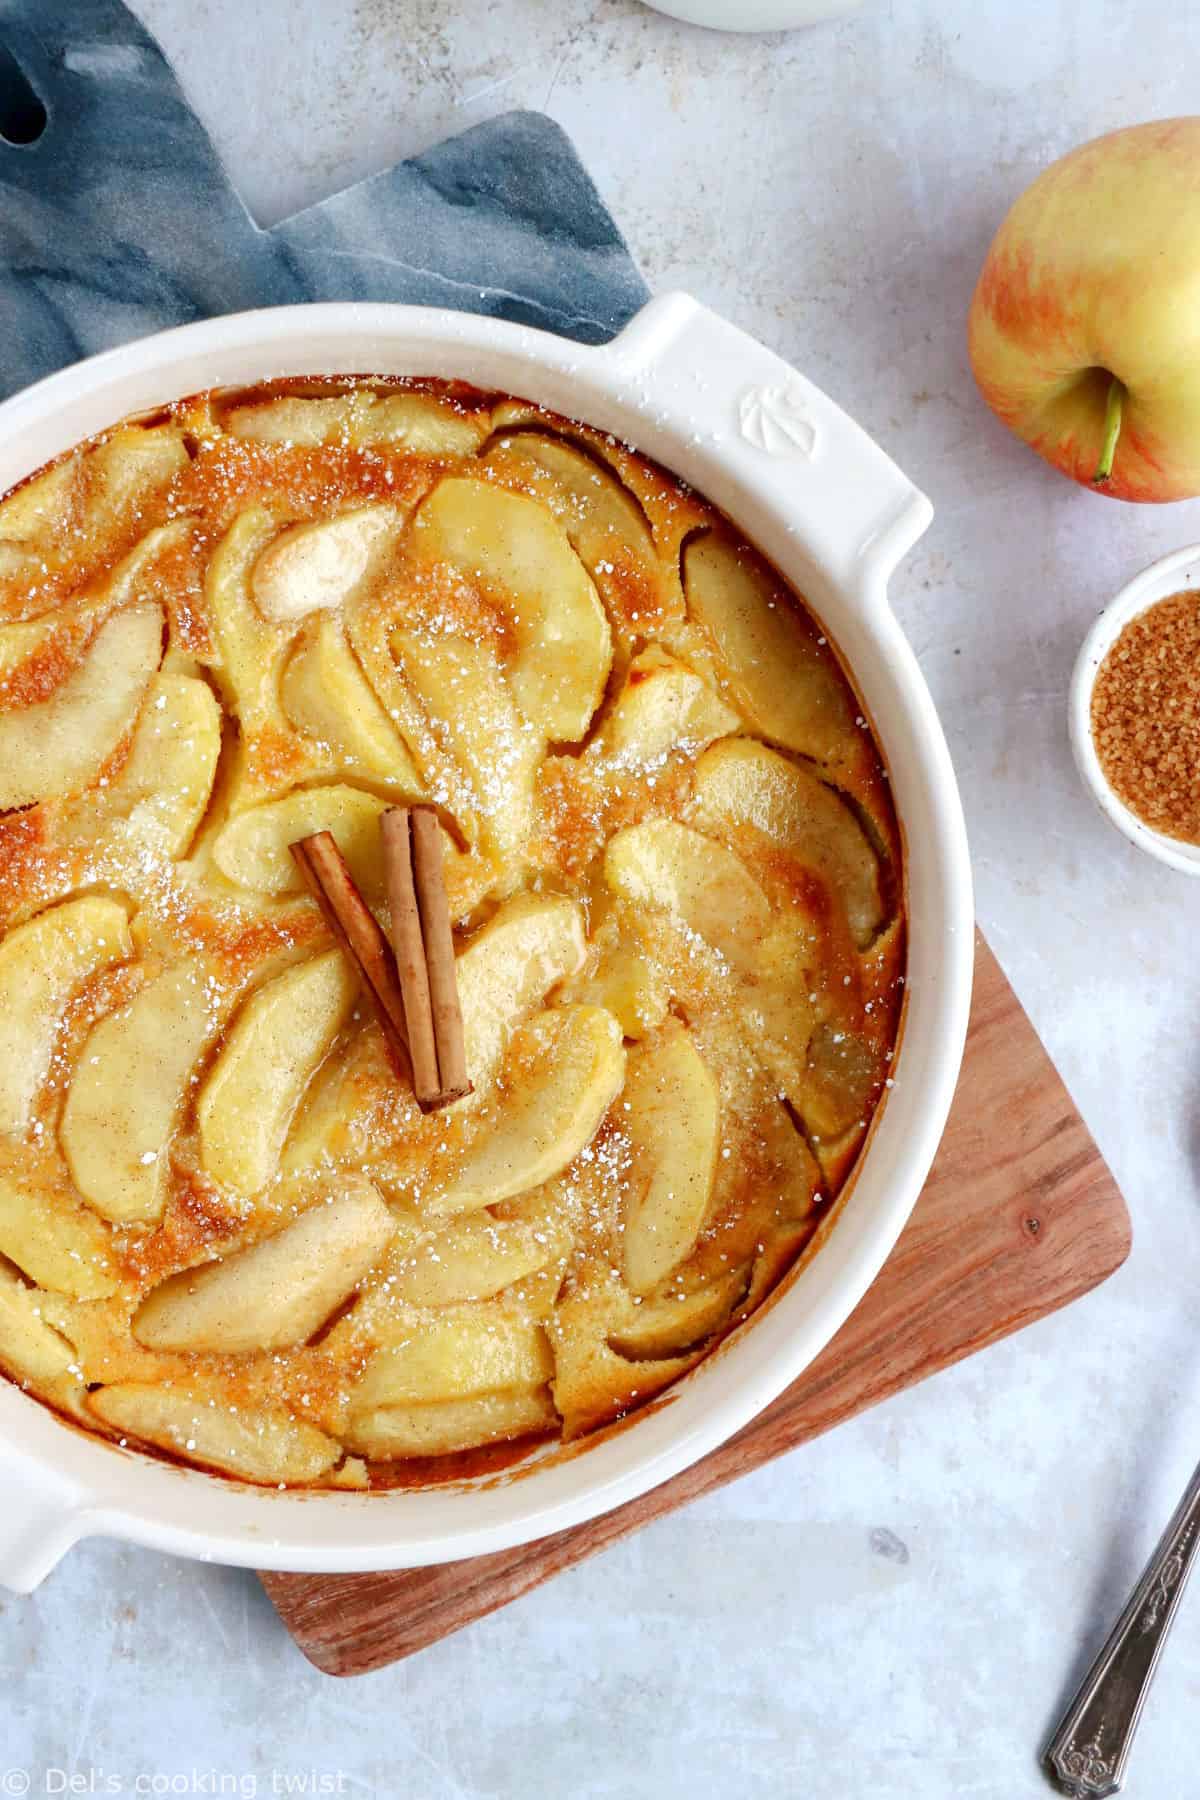 Apple clafoutis is one of the easiest apple dessert you could possibly make, yet completely irresistible and slightly addictive.